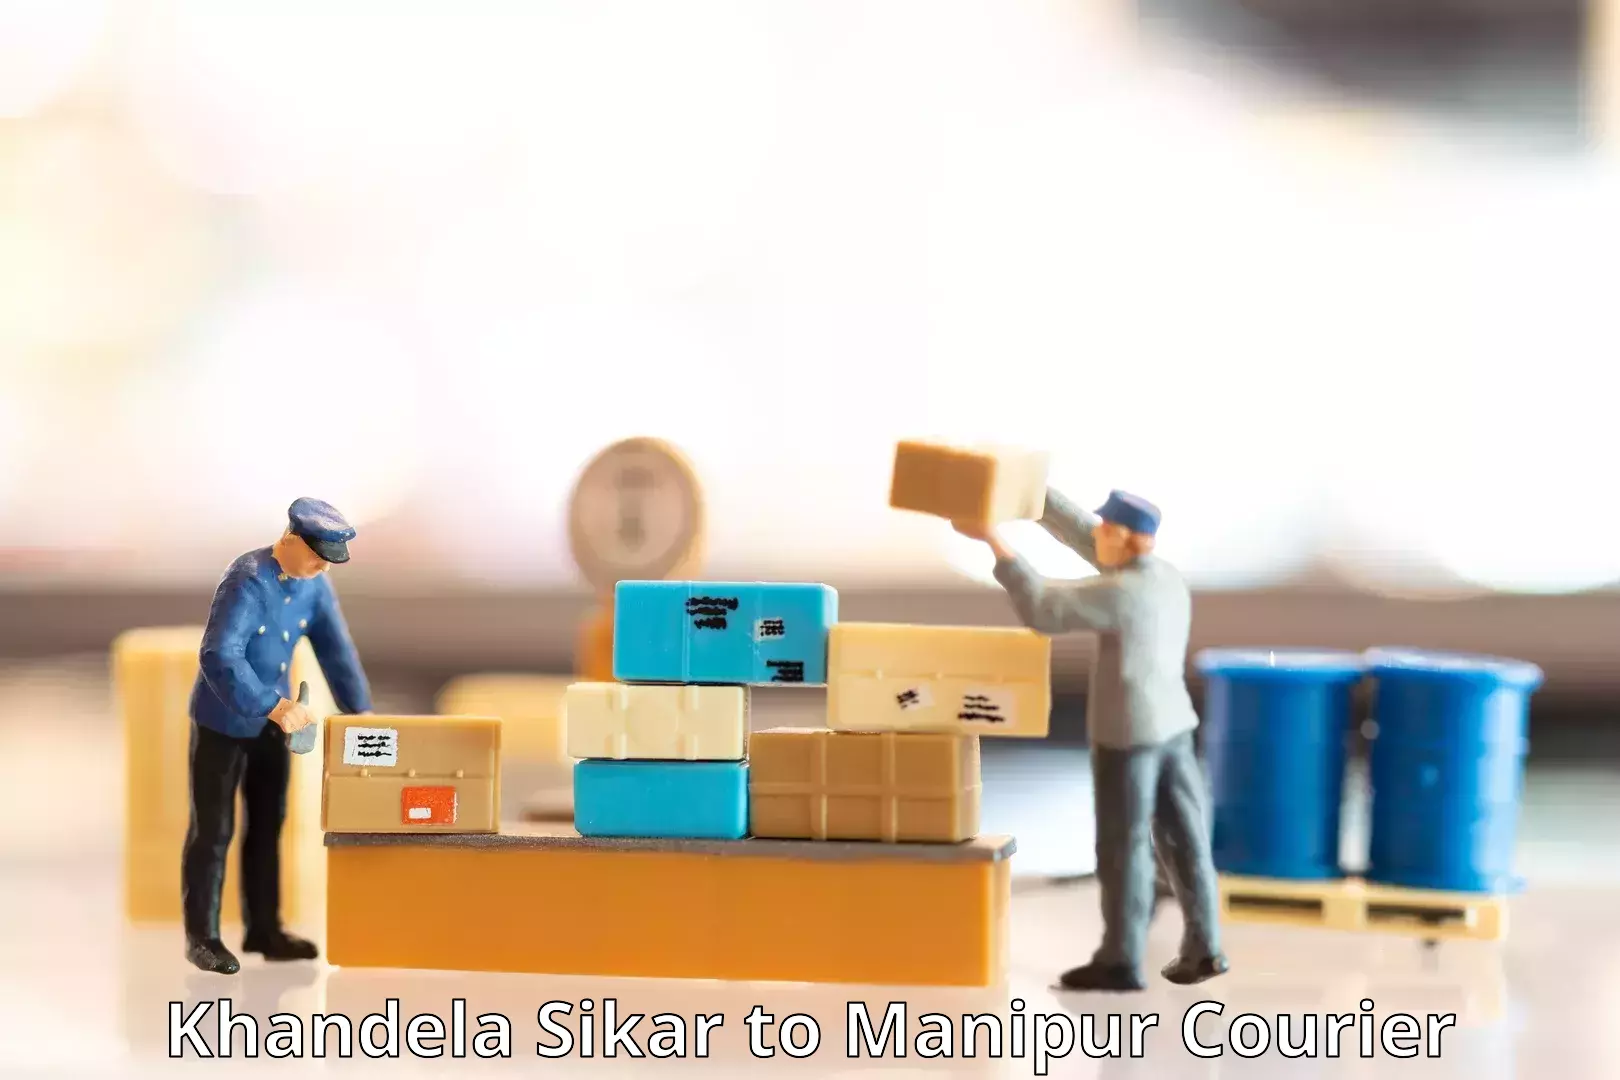 Easy access courier services Khandela Sikar to Chandel